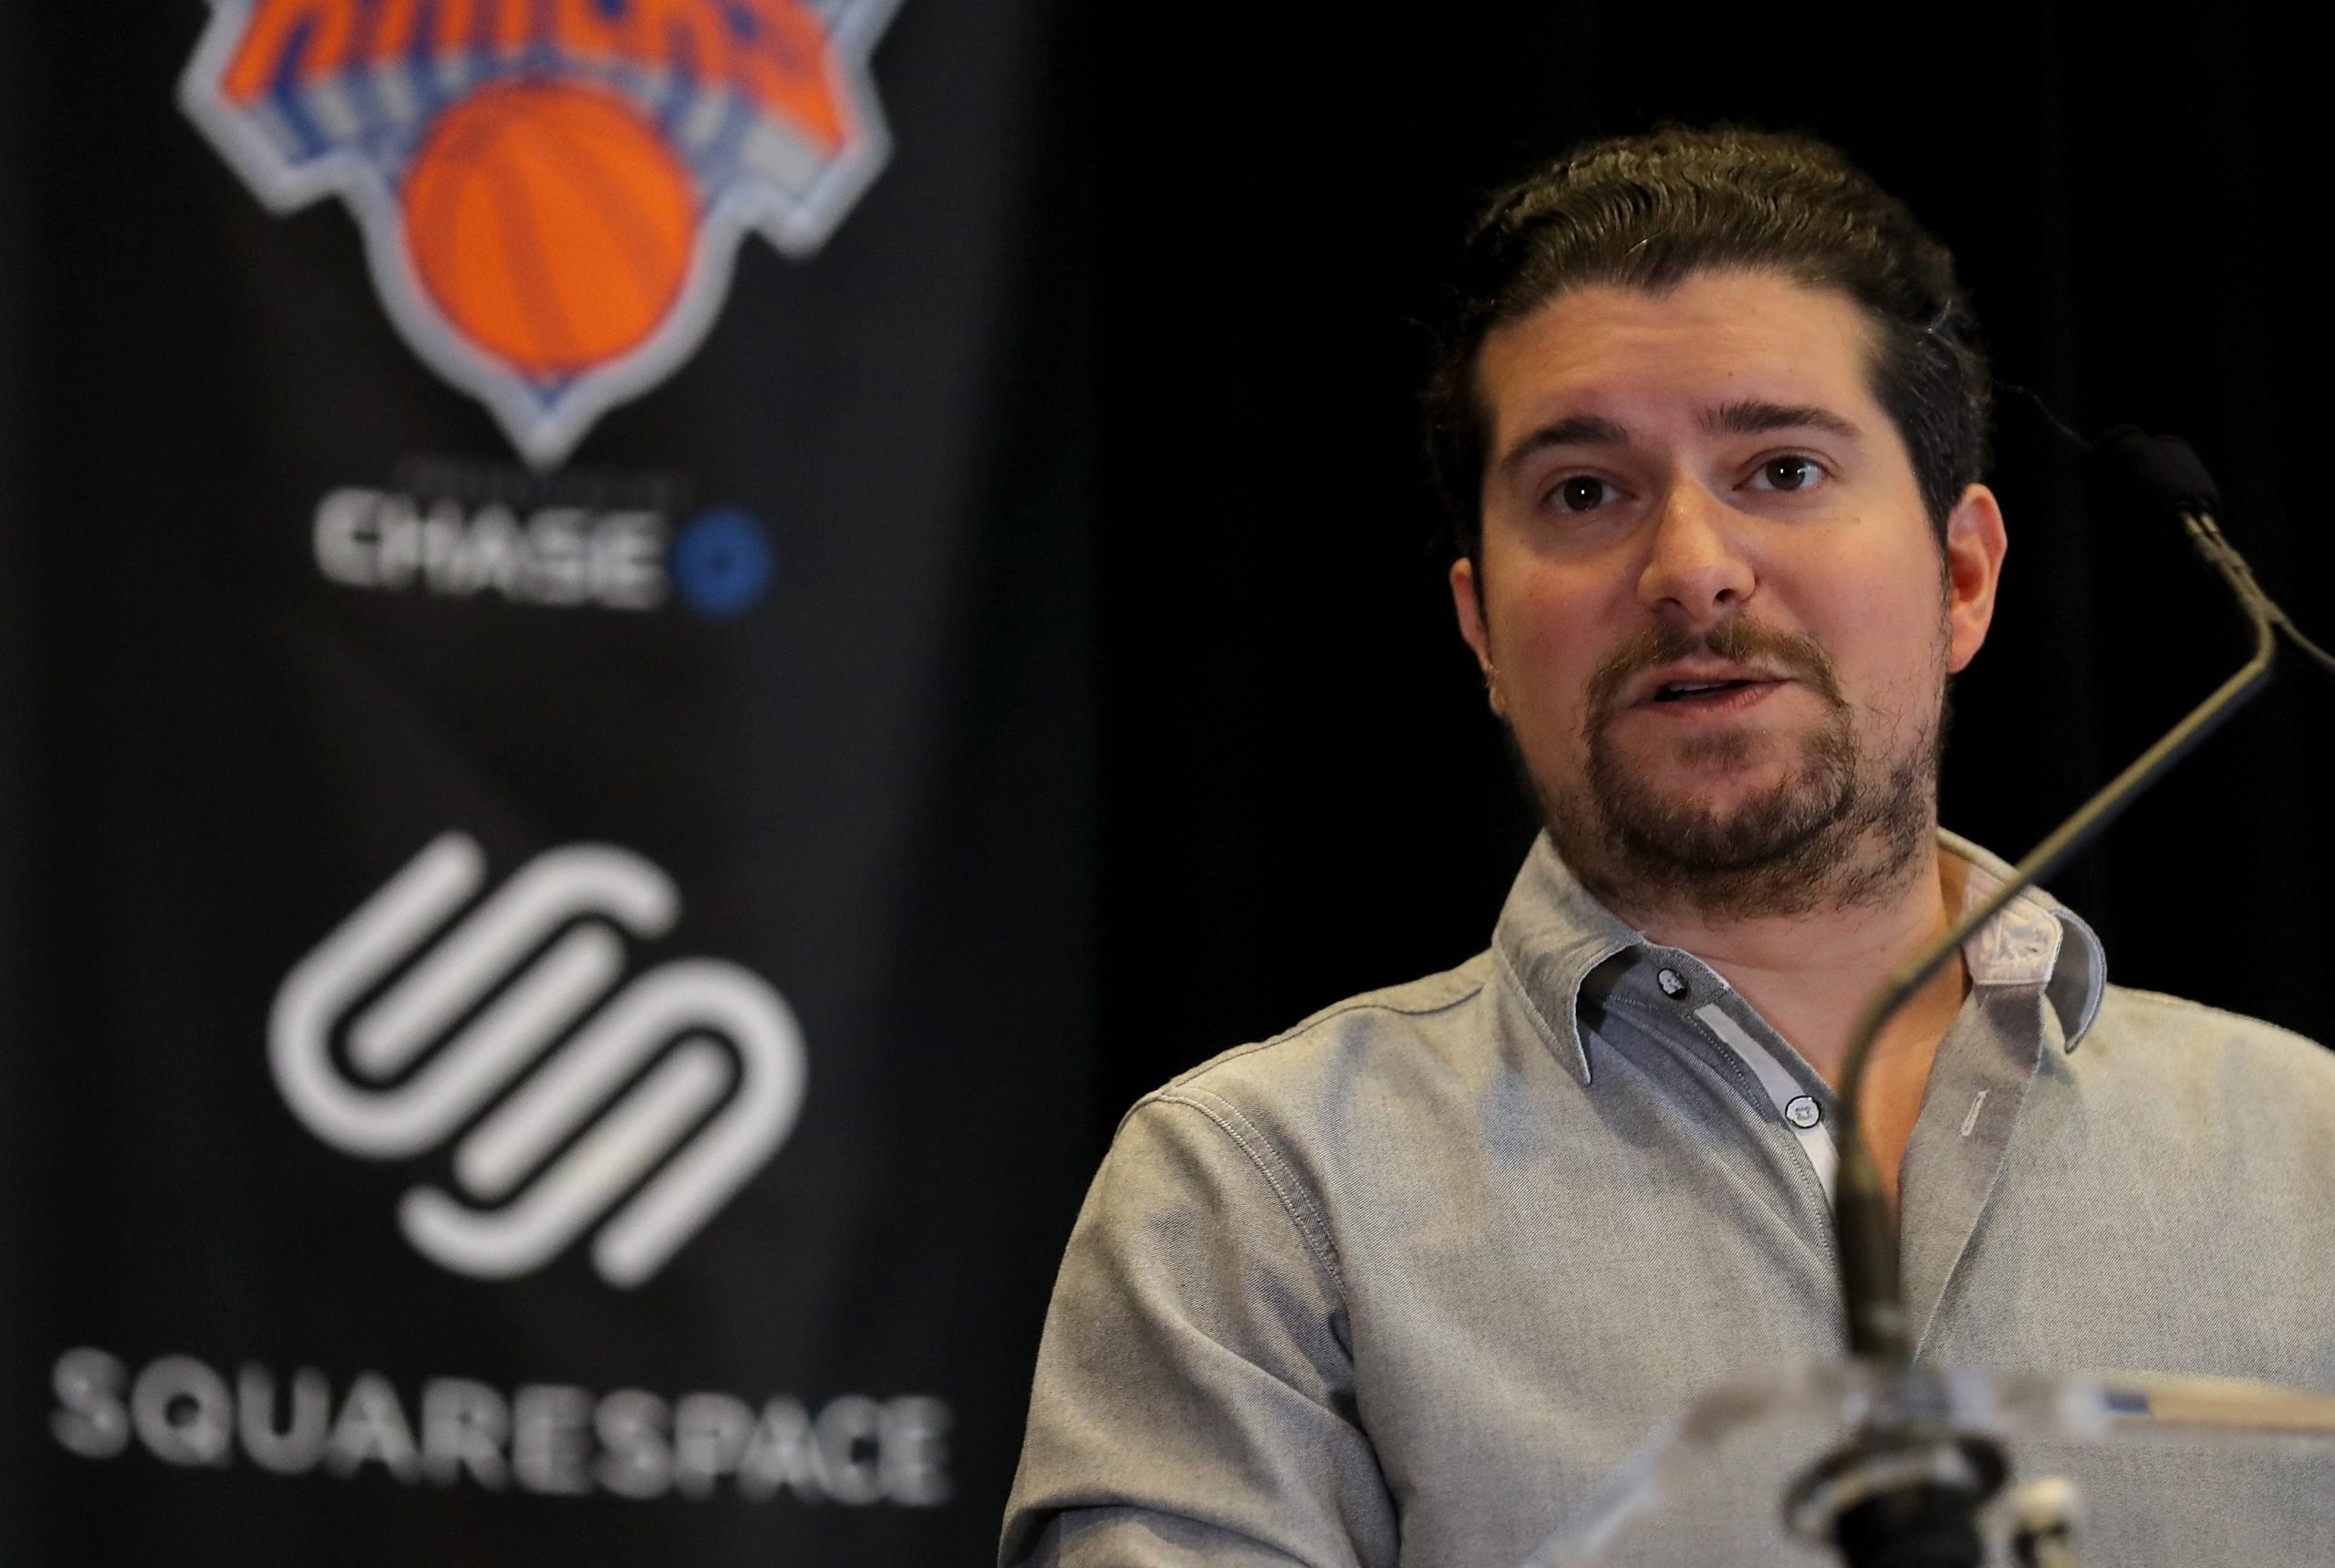 Squarespace founder Anthony Casalena speaks at the unveiling of the Knicks' jersey sponsorship with Squarespace at Madison Square Garden on October 10, 2017 in New York City.